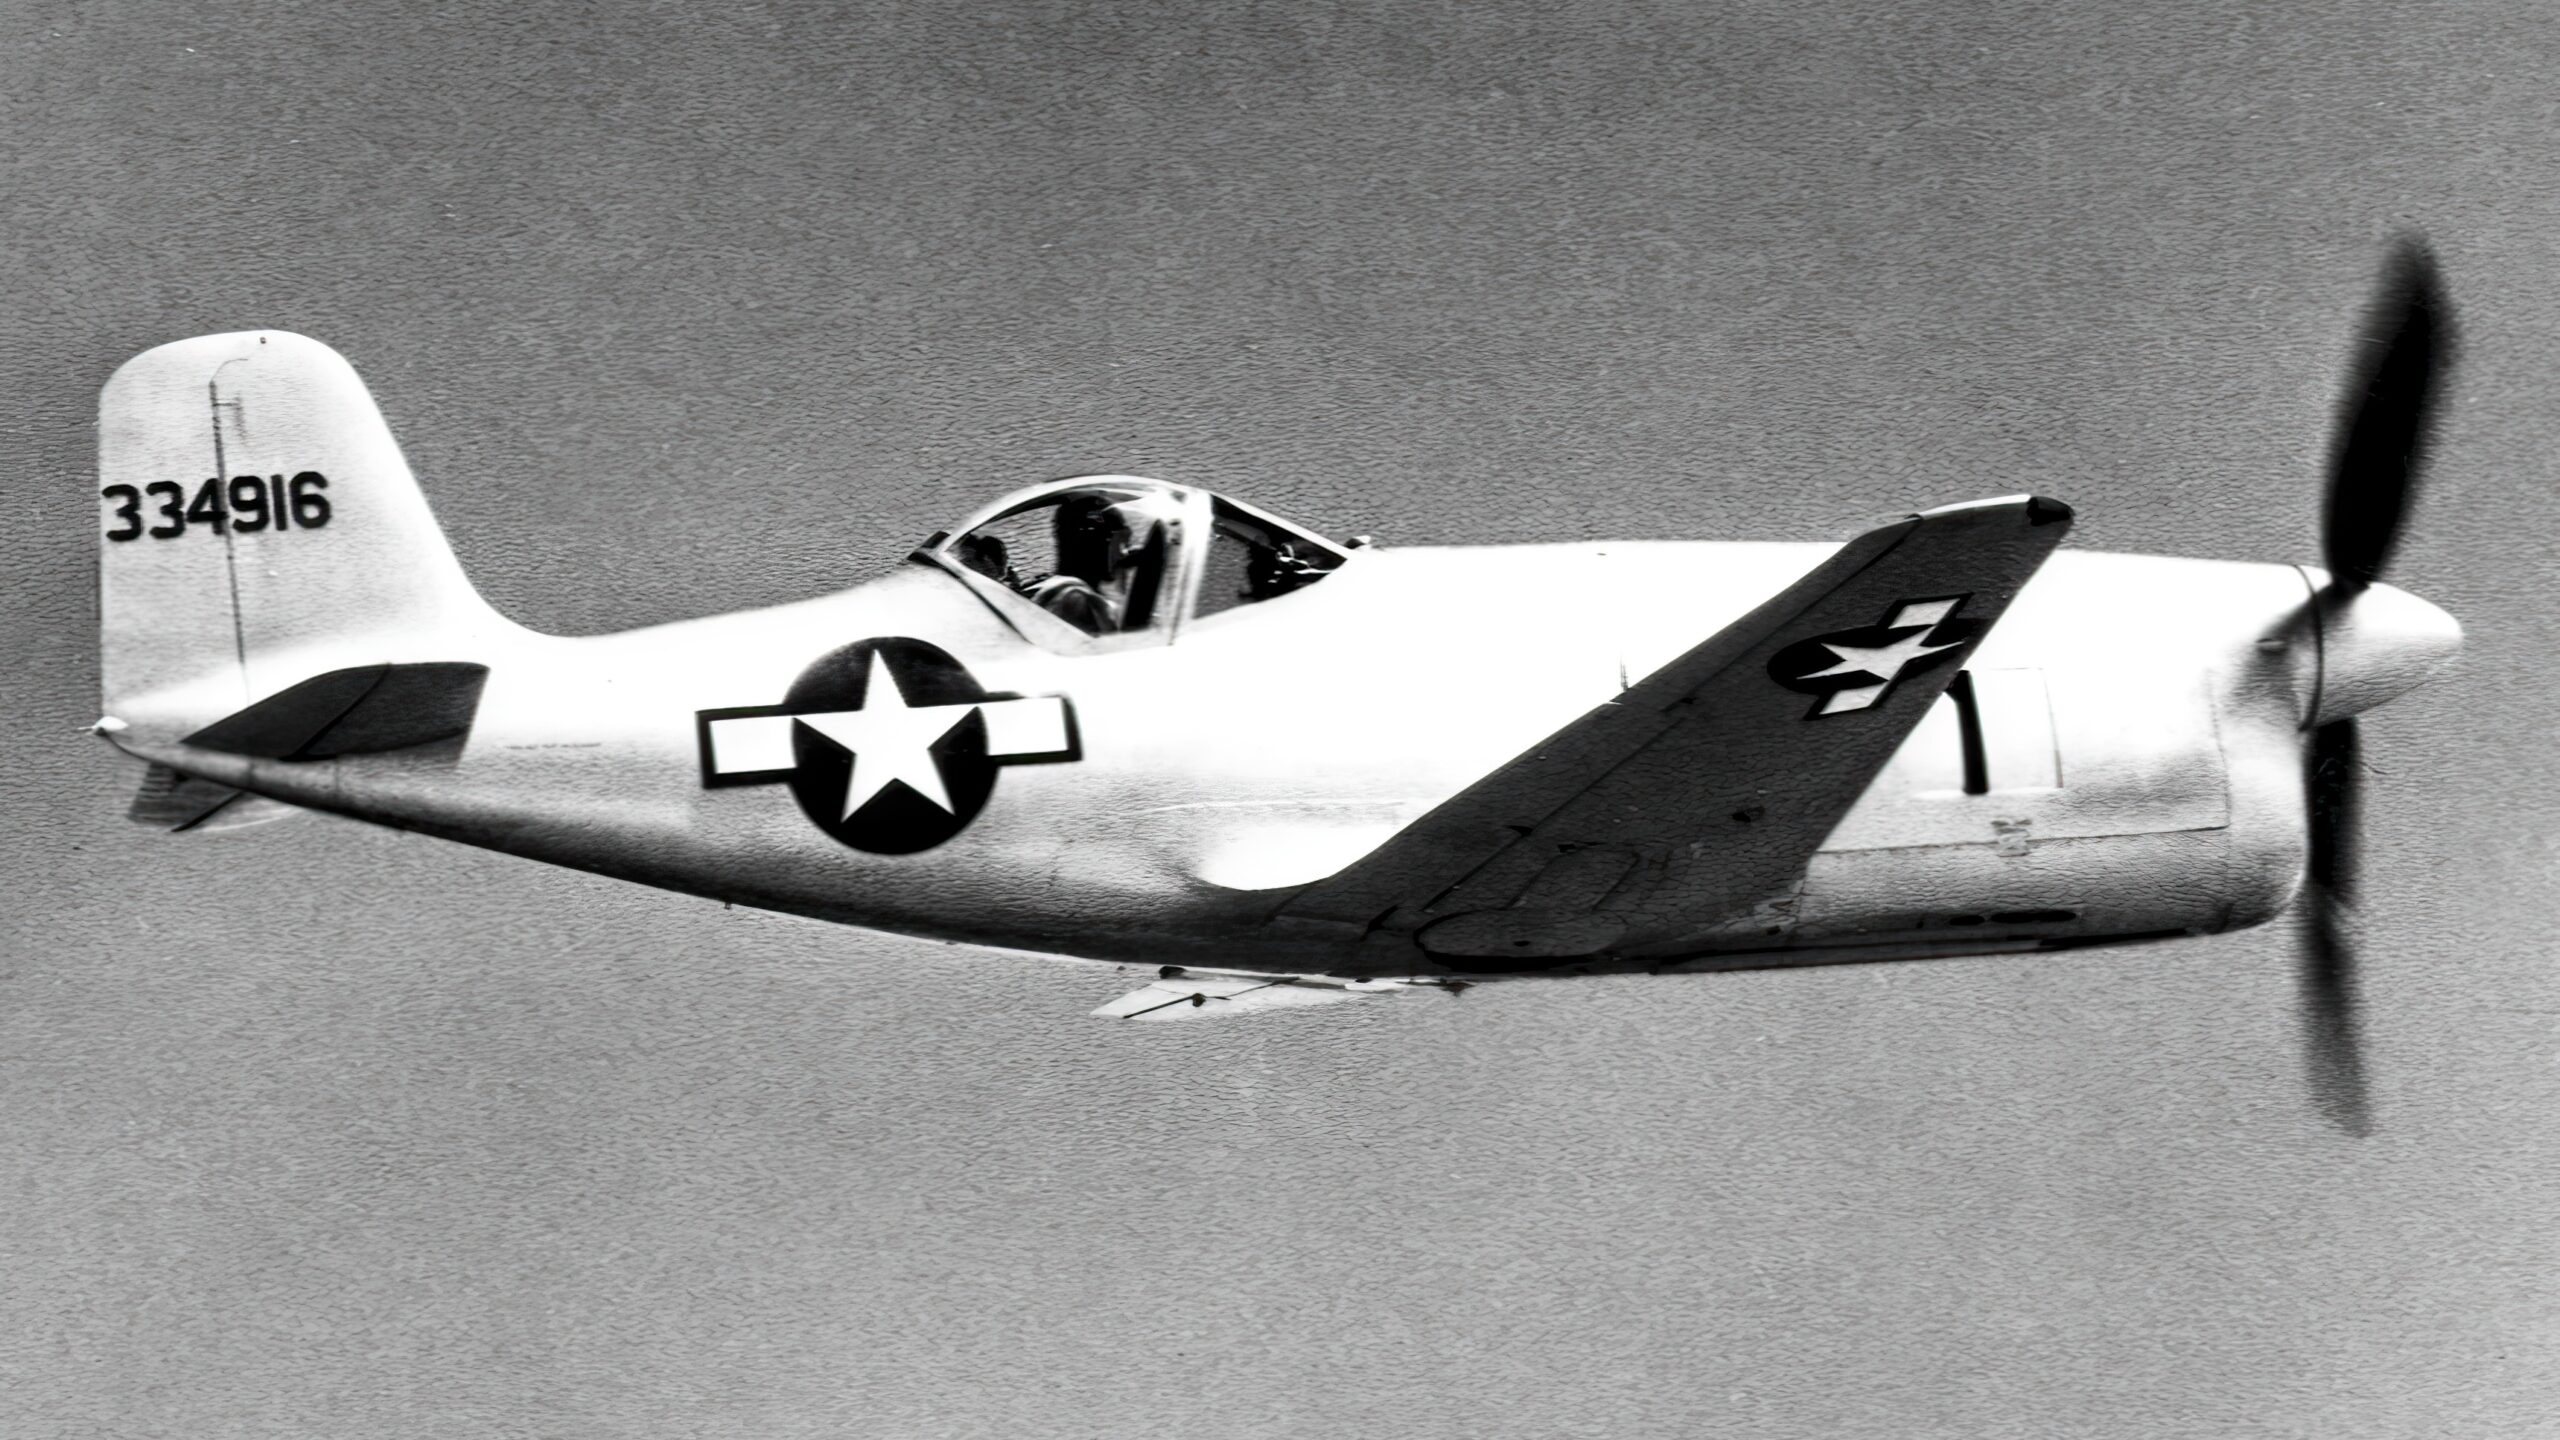 U.S. Army Air Forces Bell XP-77 (s/n 43-34916) in flight